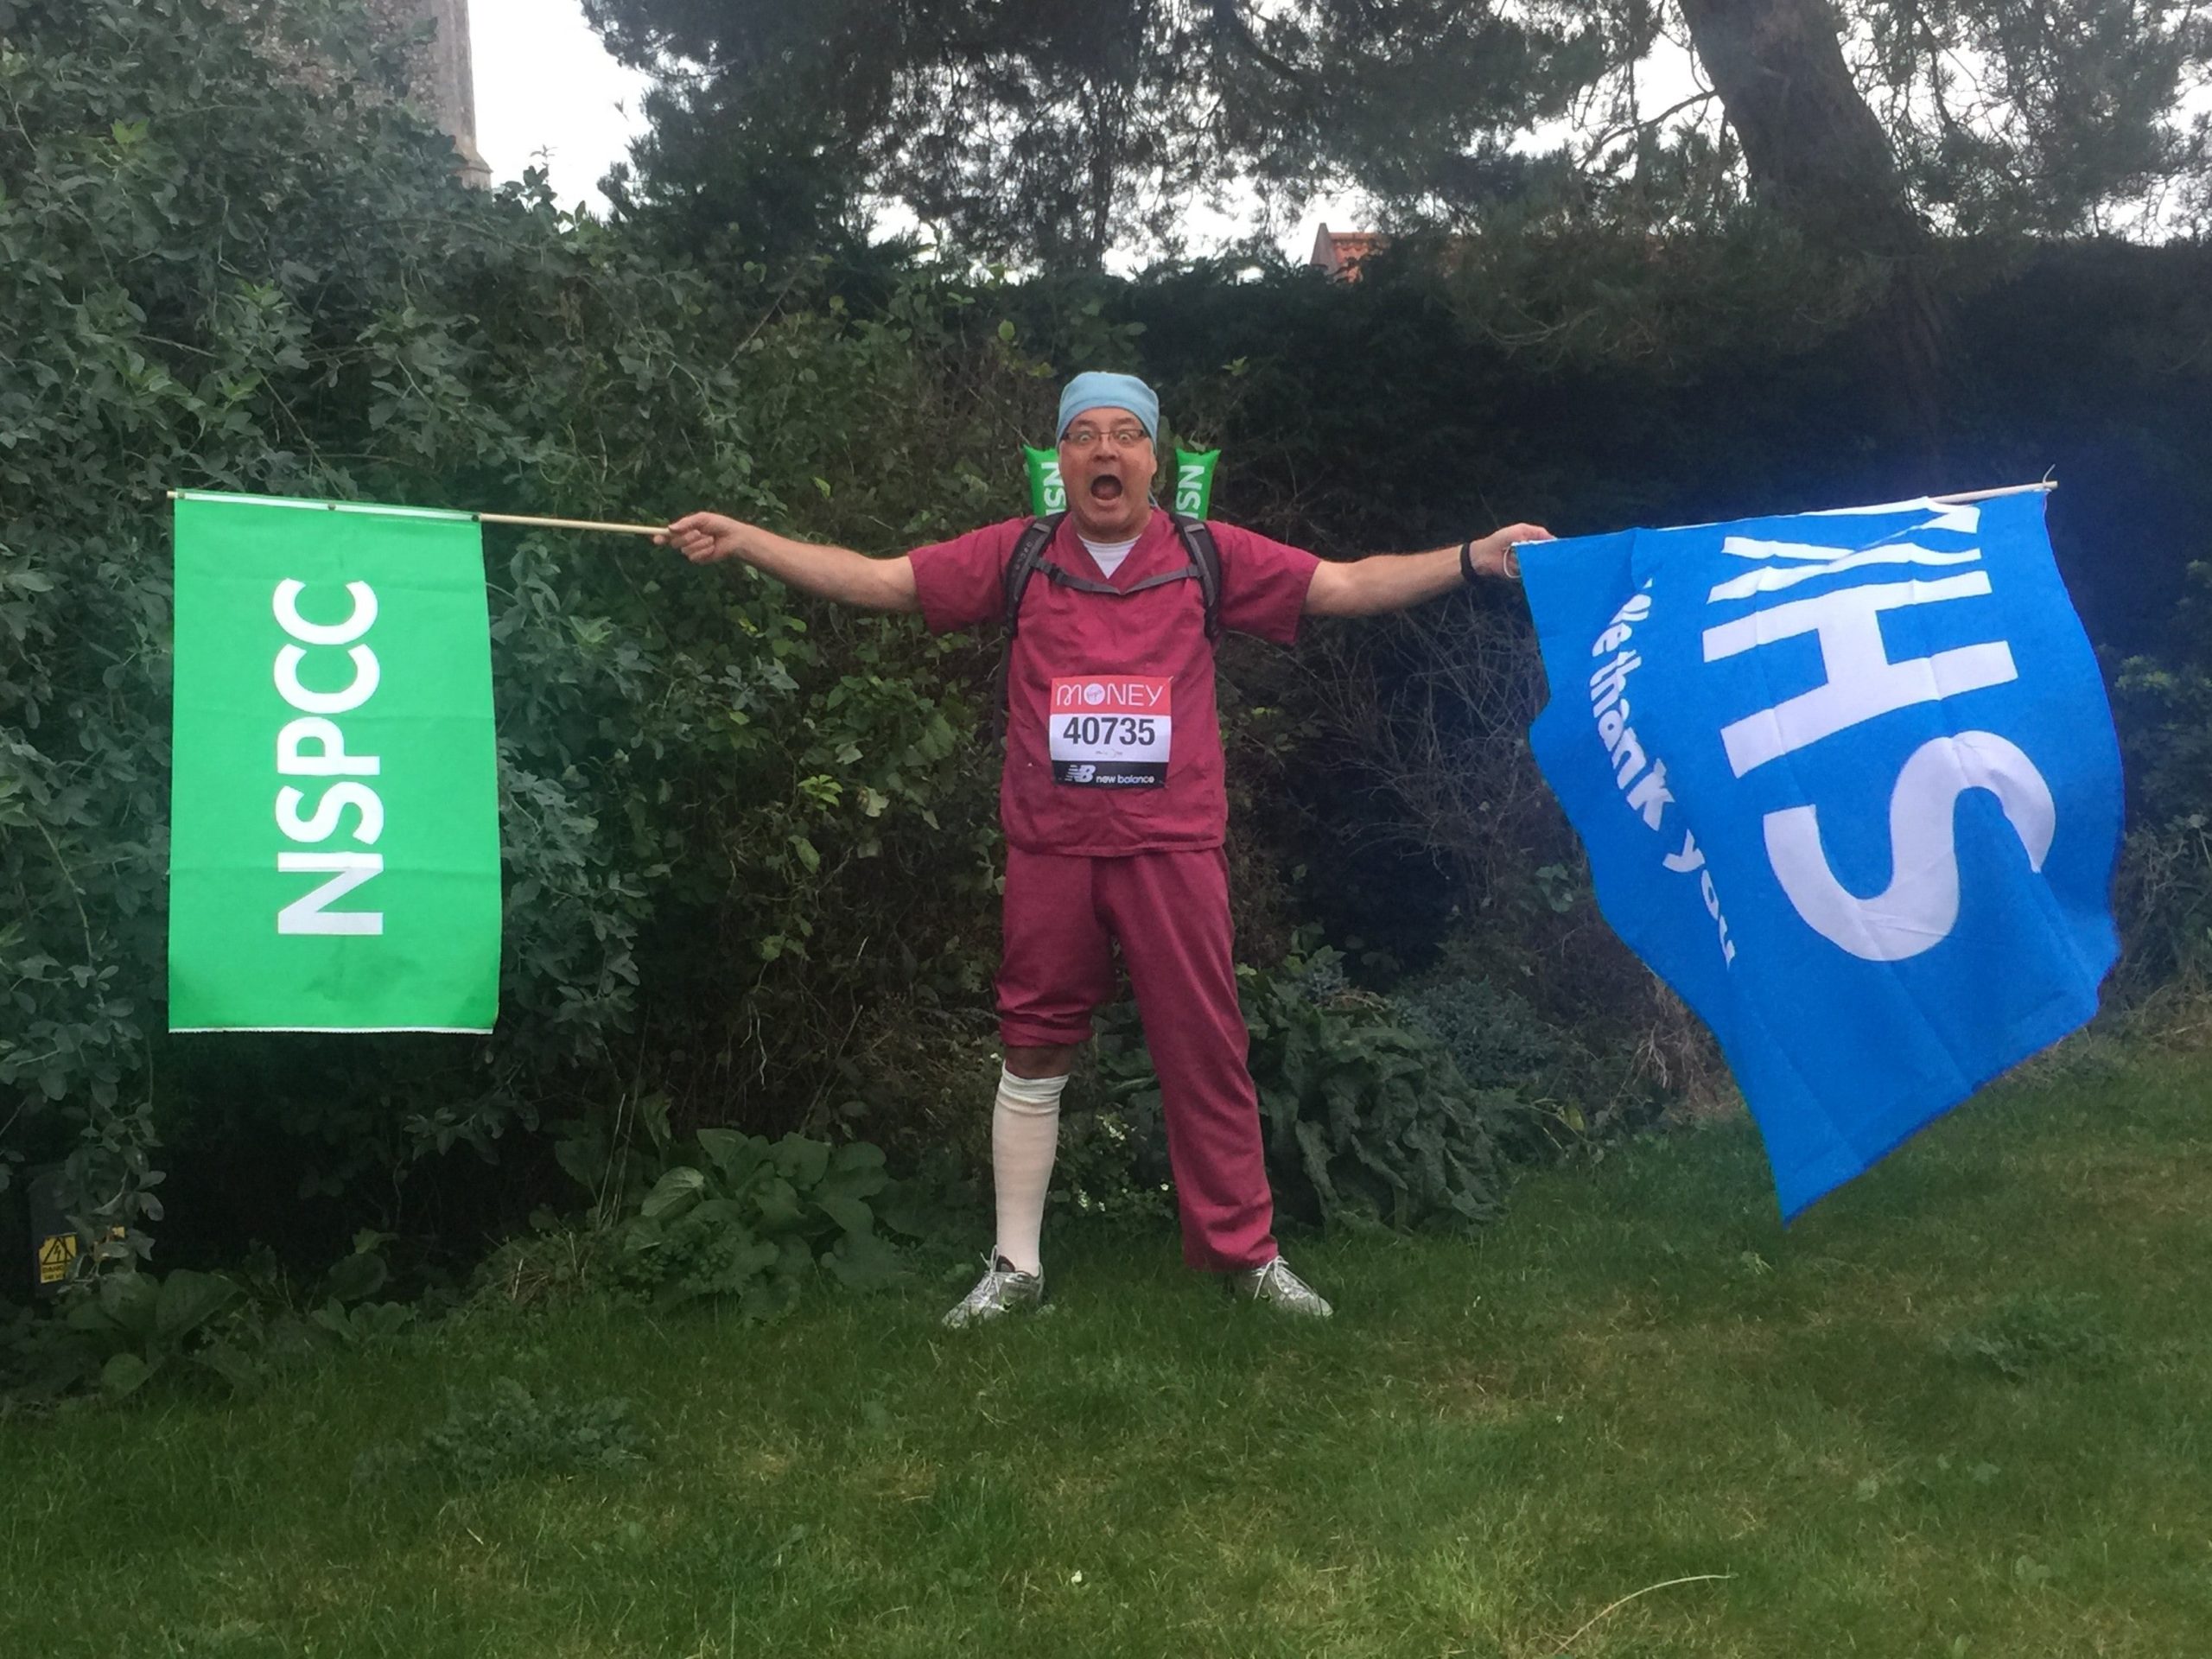 Man ready for his 26th London Marathon after fighting Covid and leg injury